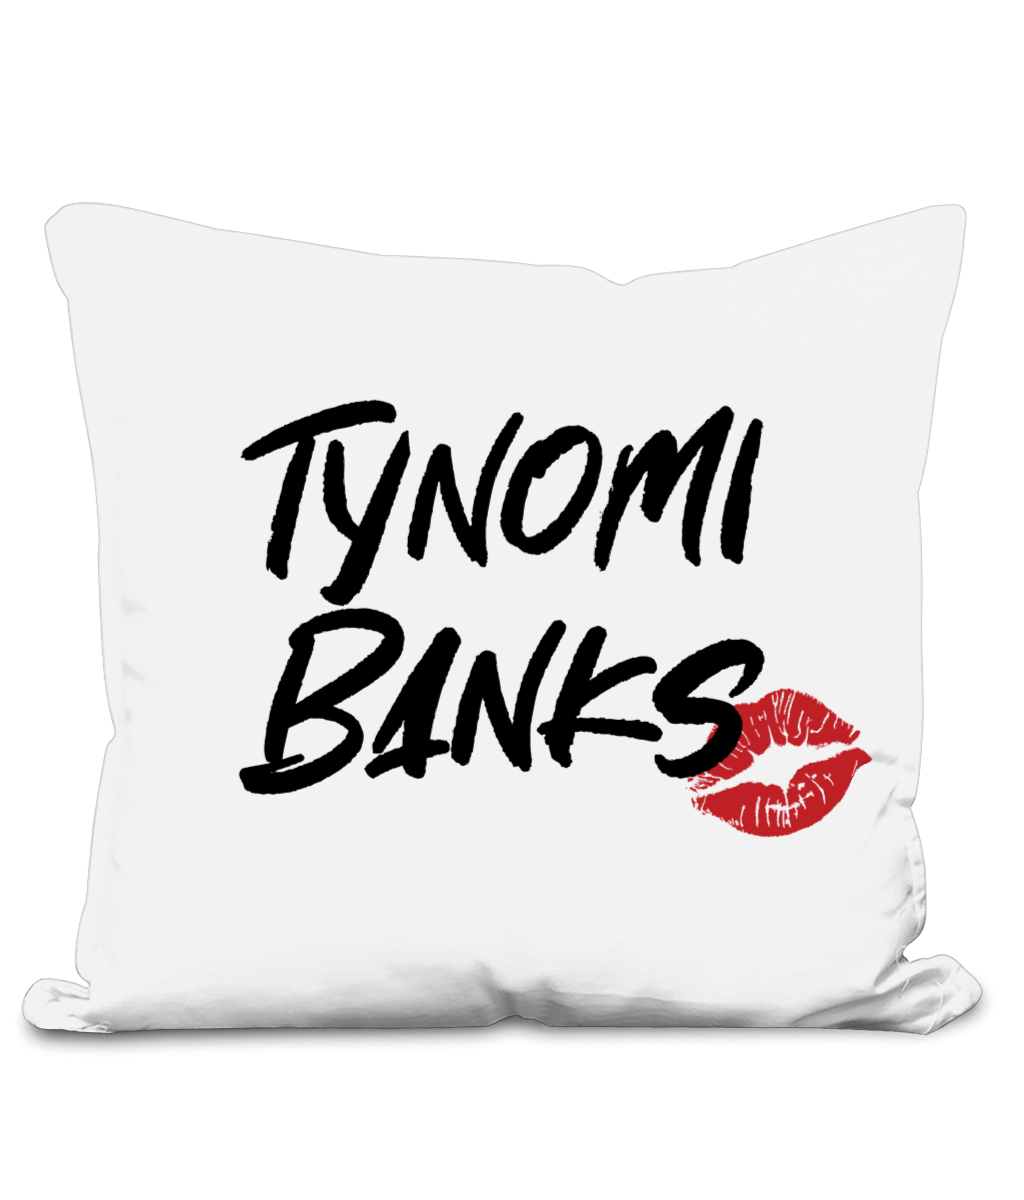 Tynomi Banks - Logo Cushion Cover - SNATCHED MERCH